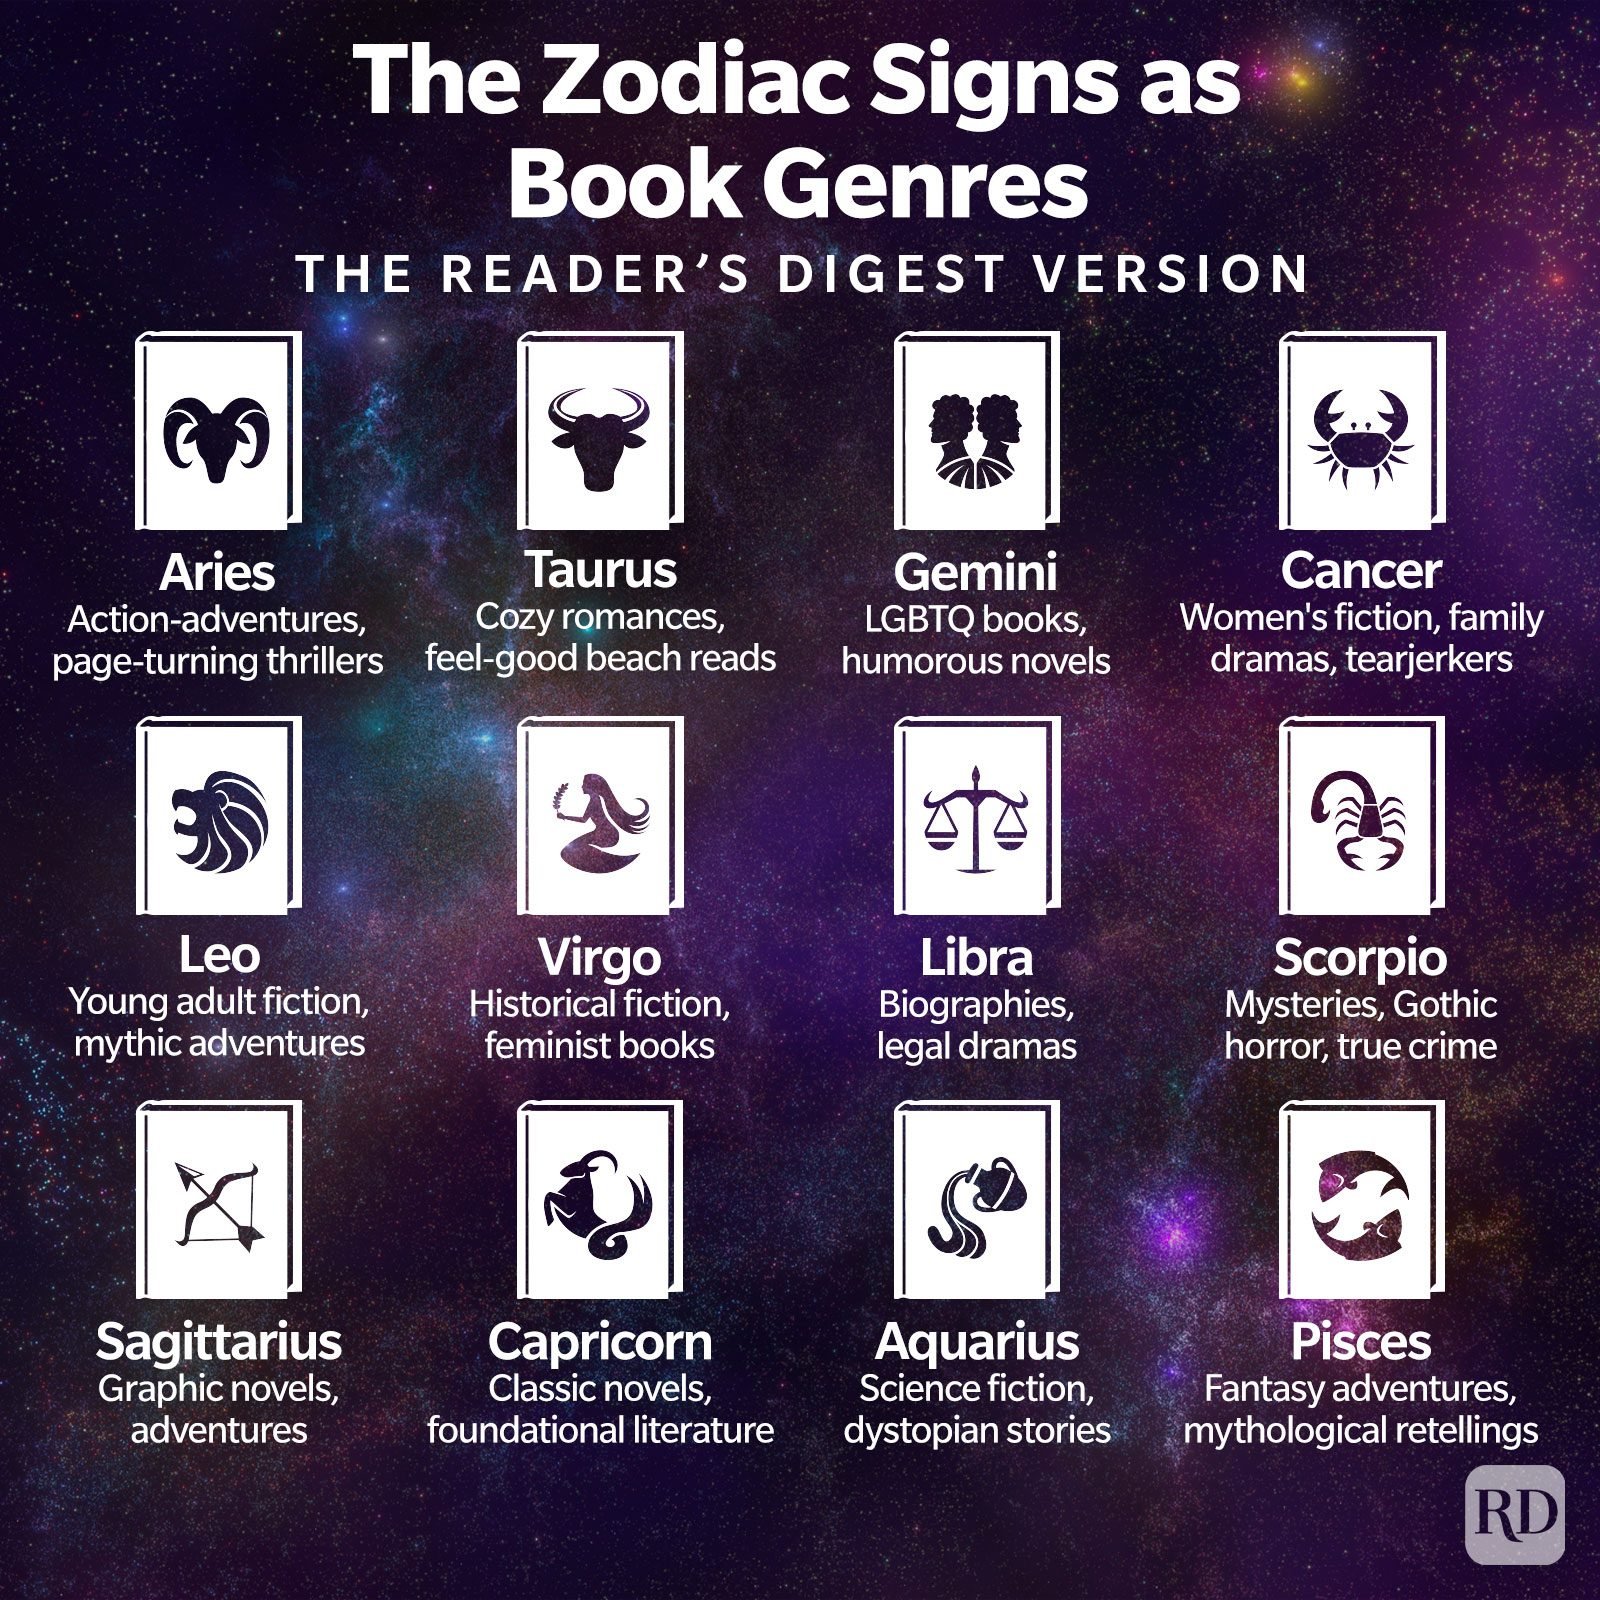 The Best Books To Read This Year, Based On Your Zodiac Sign